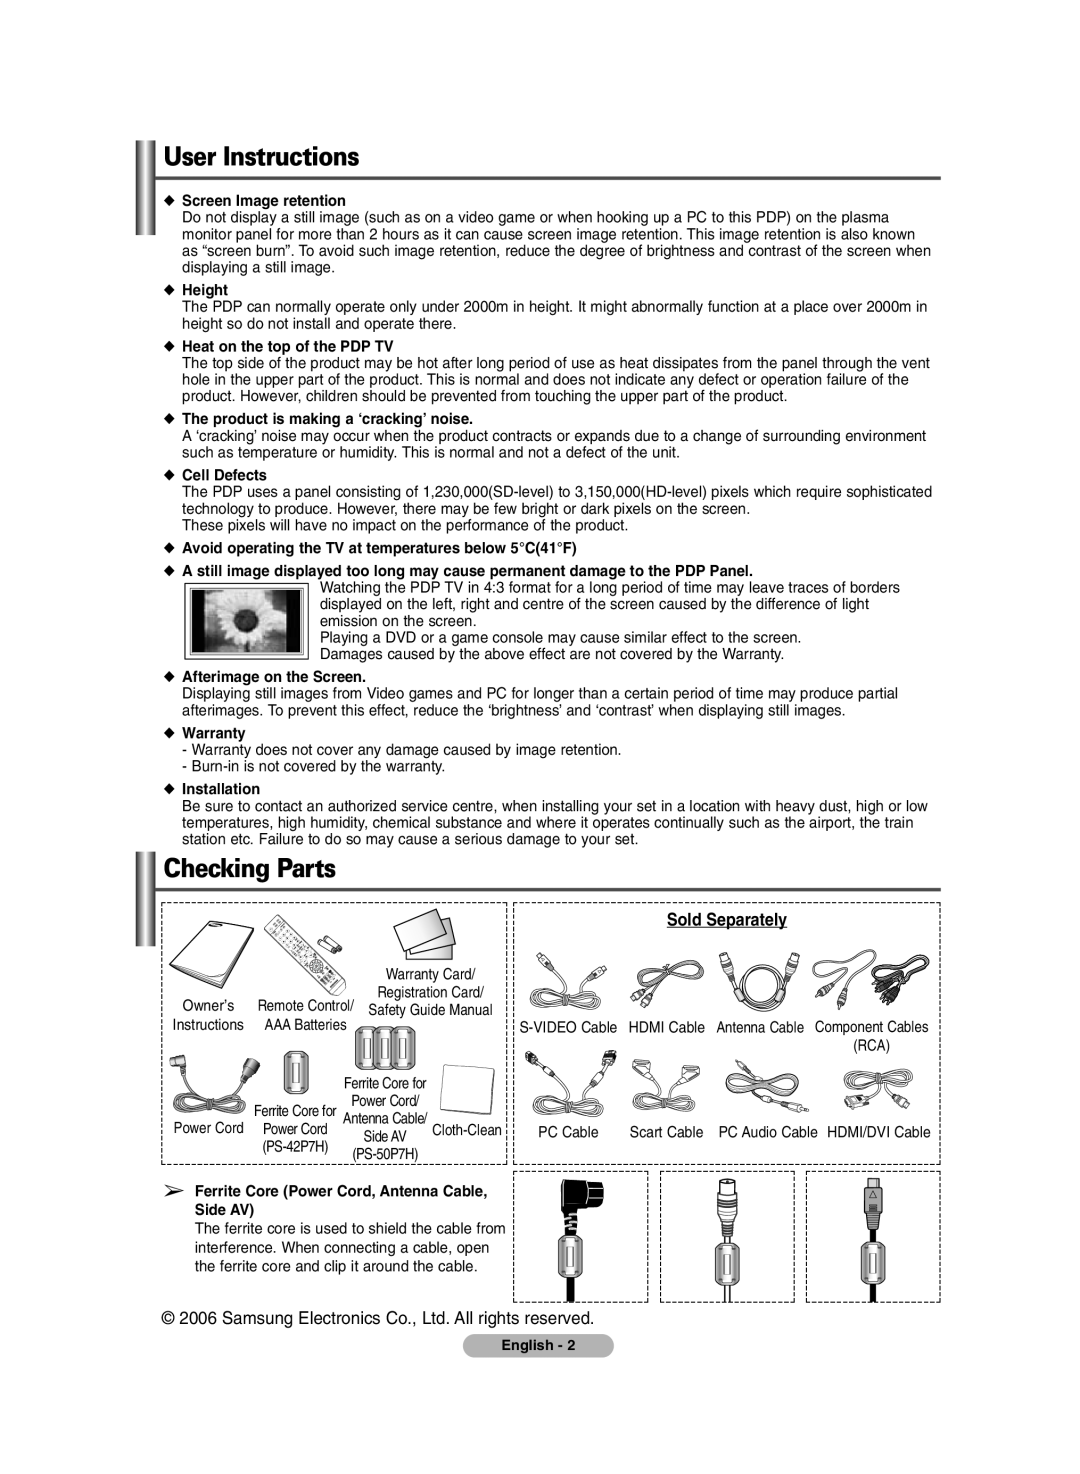 Samsung PDP-TELEVISION manual User Instructions, Checking Parts, Sold Separately 